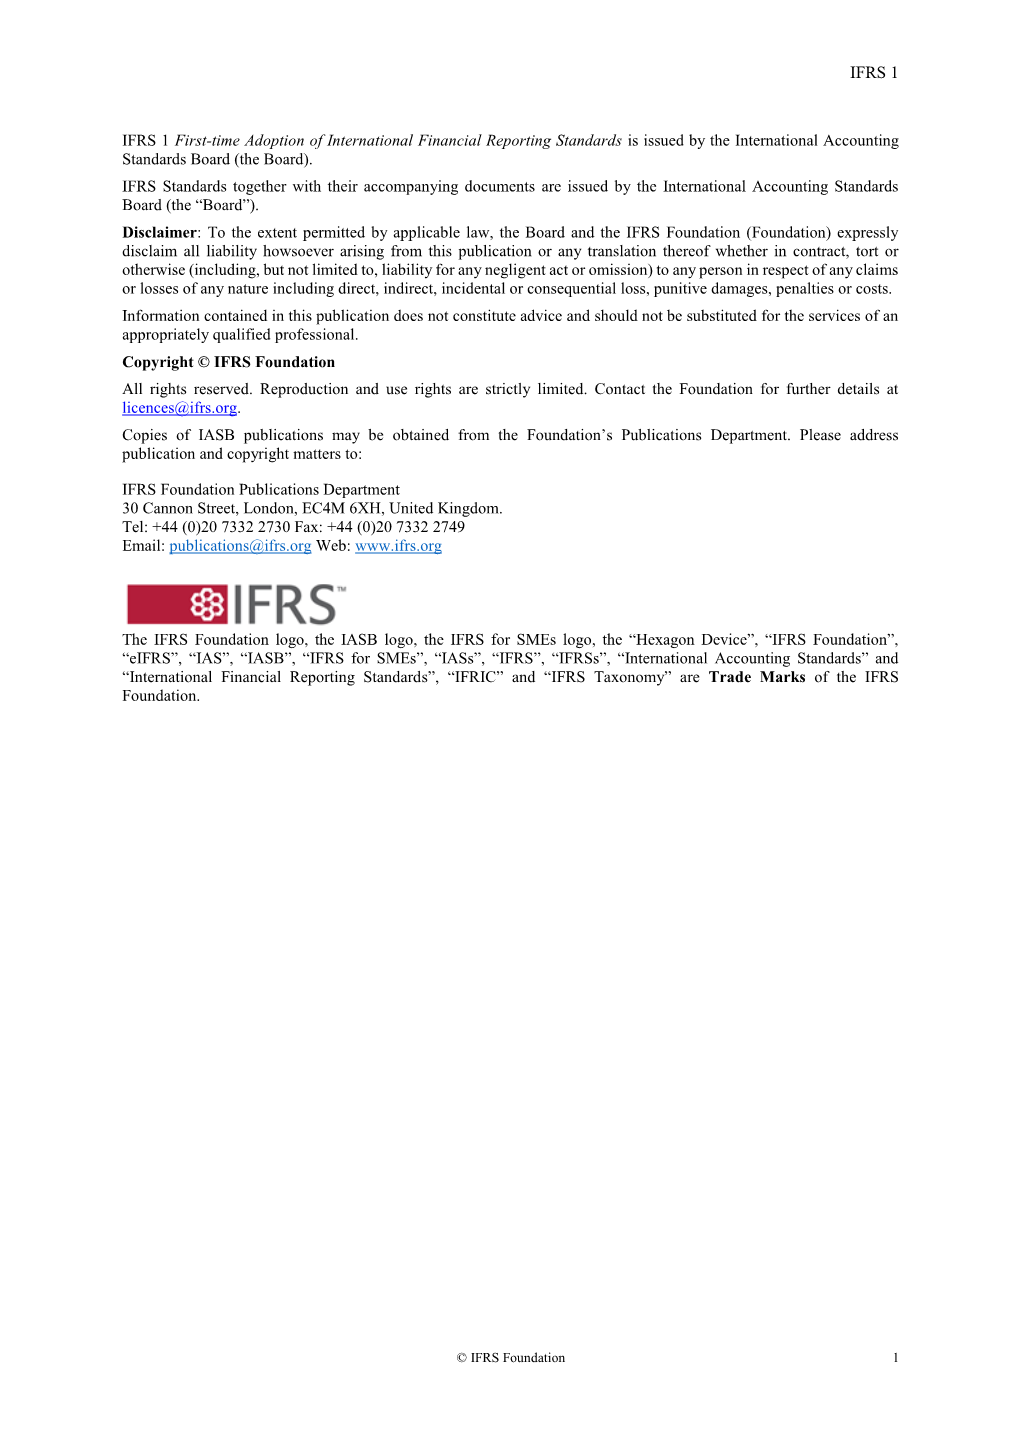 IFRS 1 IFRS 1 First-Time Adoption of International Financial Reporting